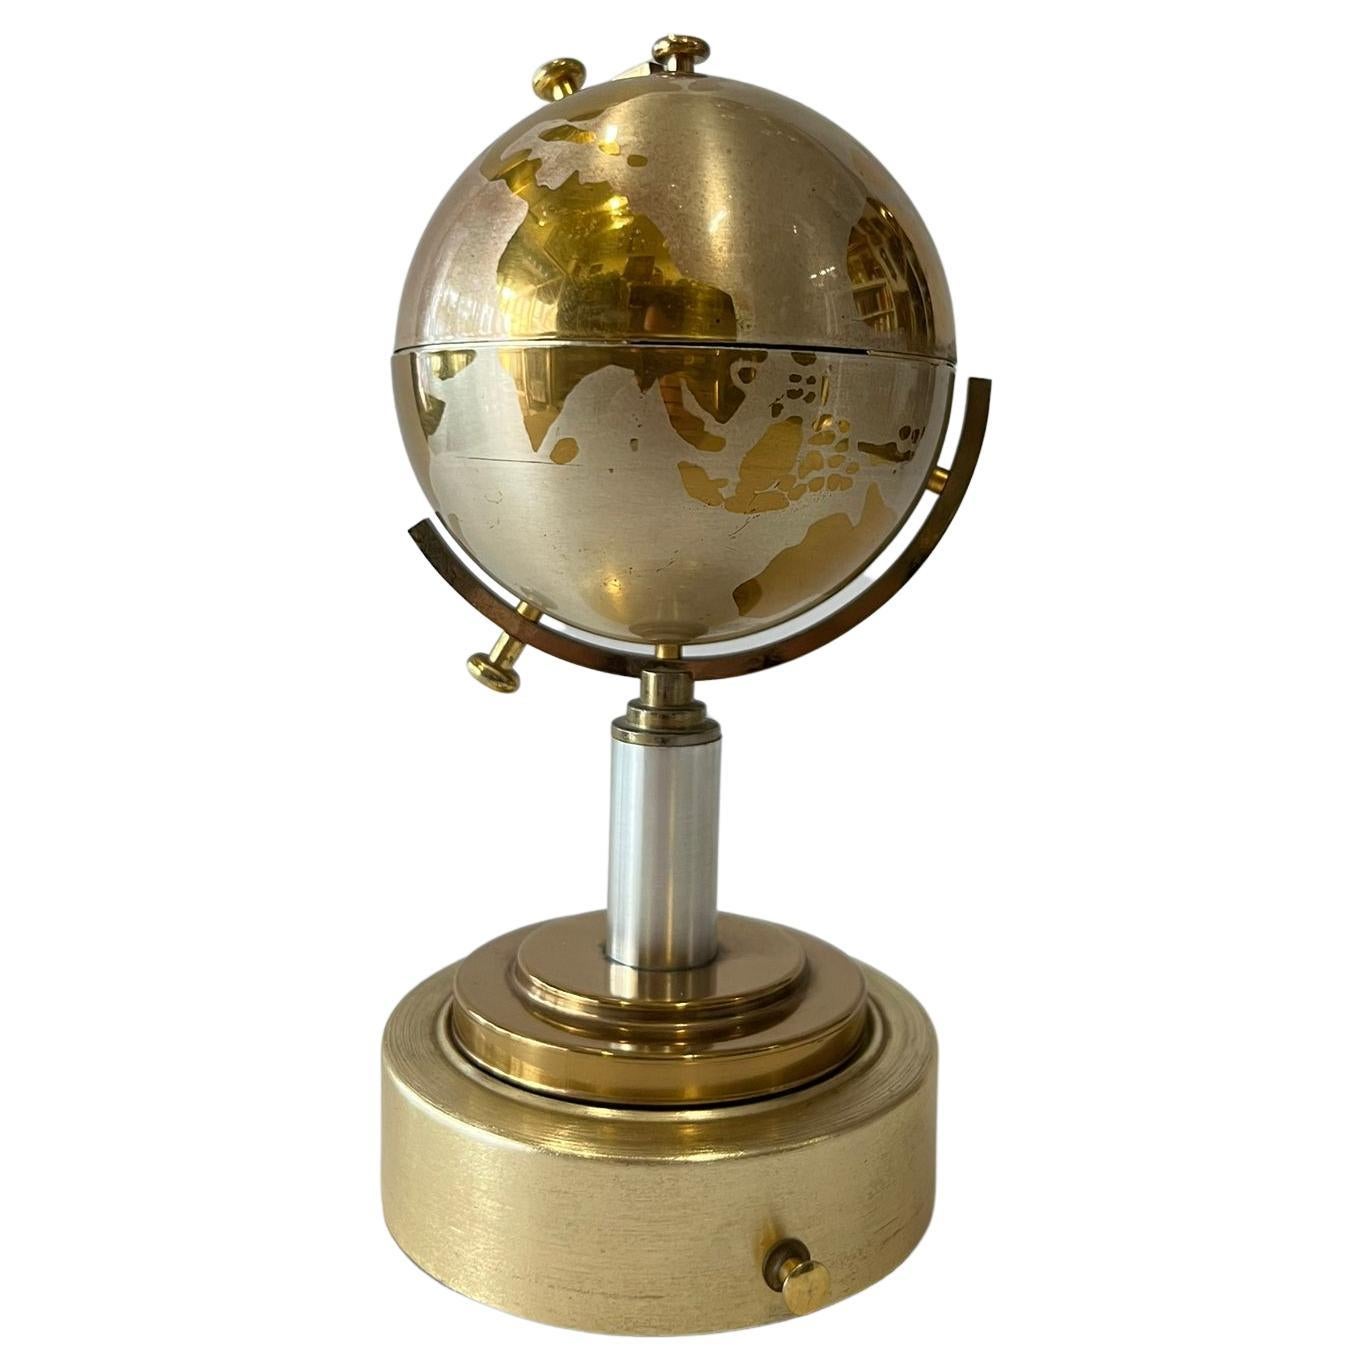 Globe Cigarette Dispenser with Music Playing Globe Lighter, Brass, Germany, 1950 For Sale 4